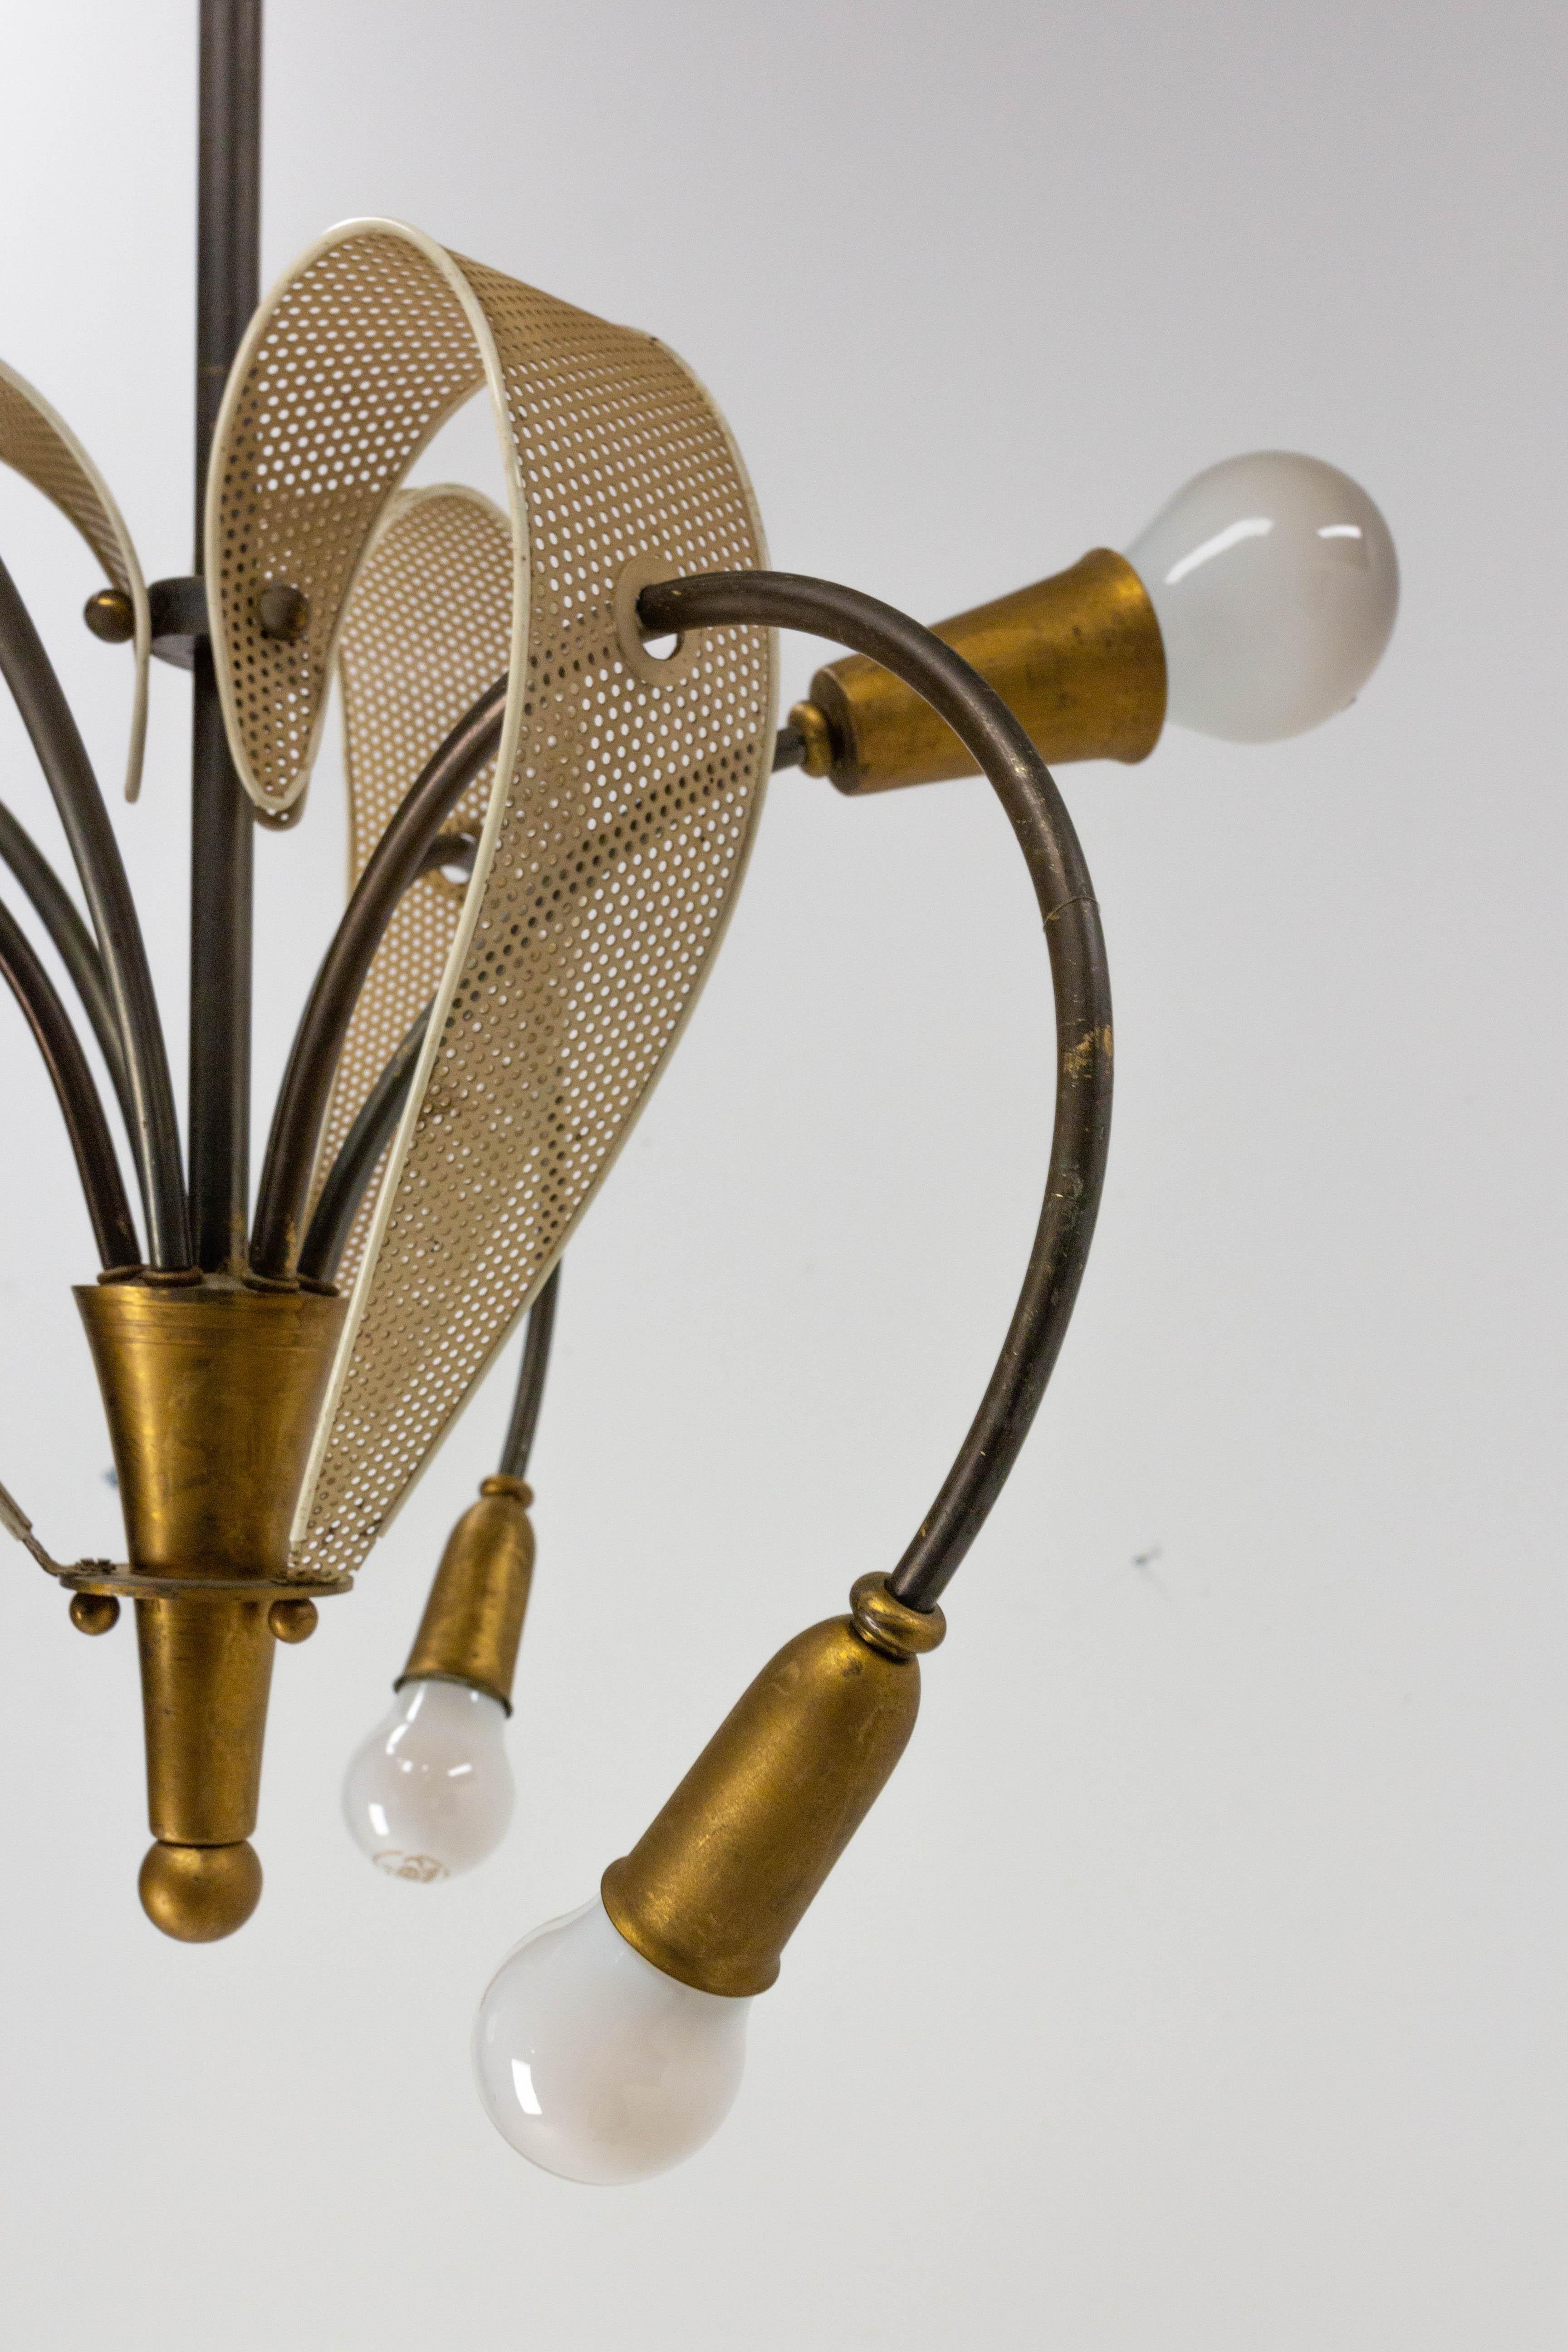 French Chandelier Ceiling Pendant Lustre c. 1950 by Pierre Guariche for Disderot For Sale 1